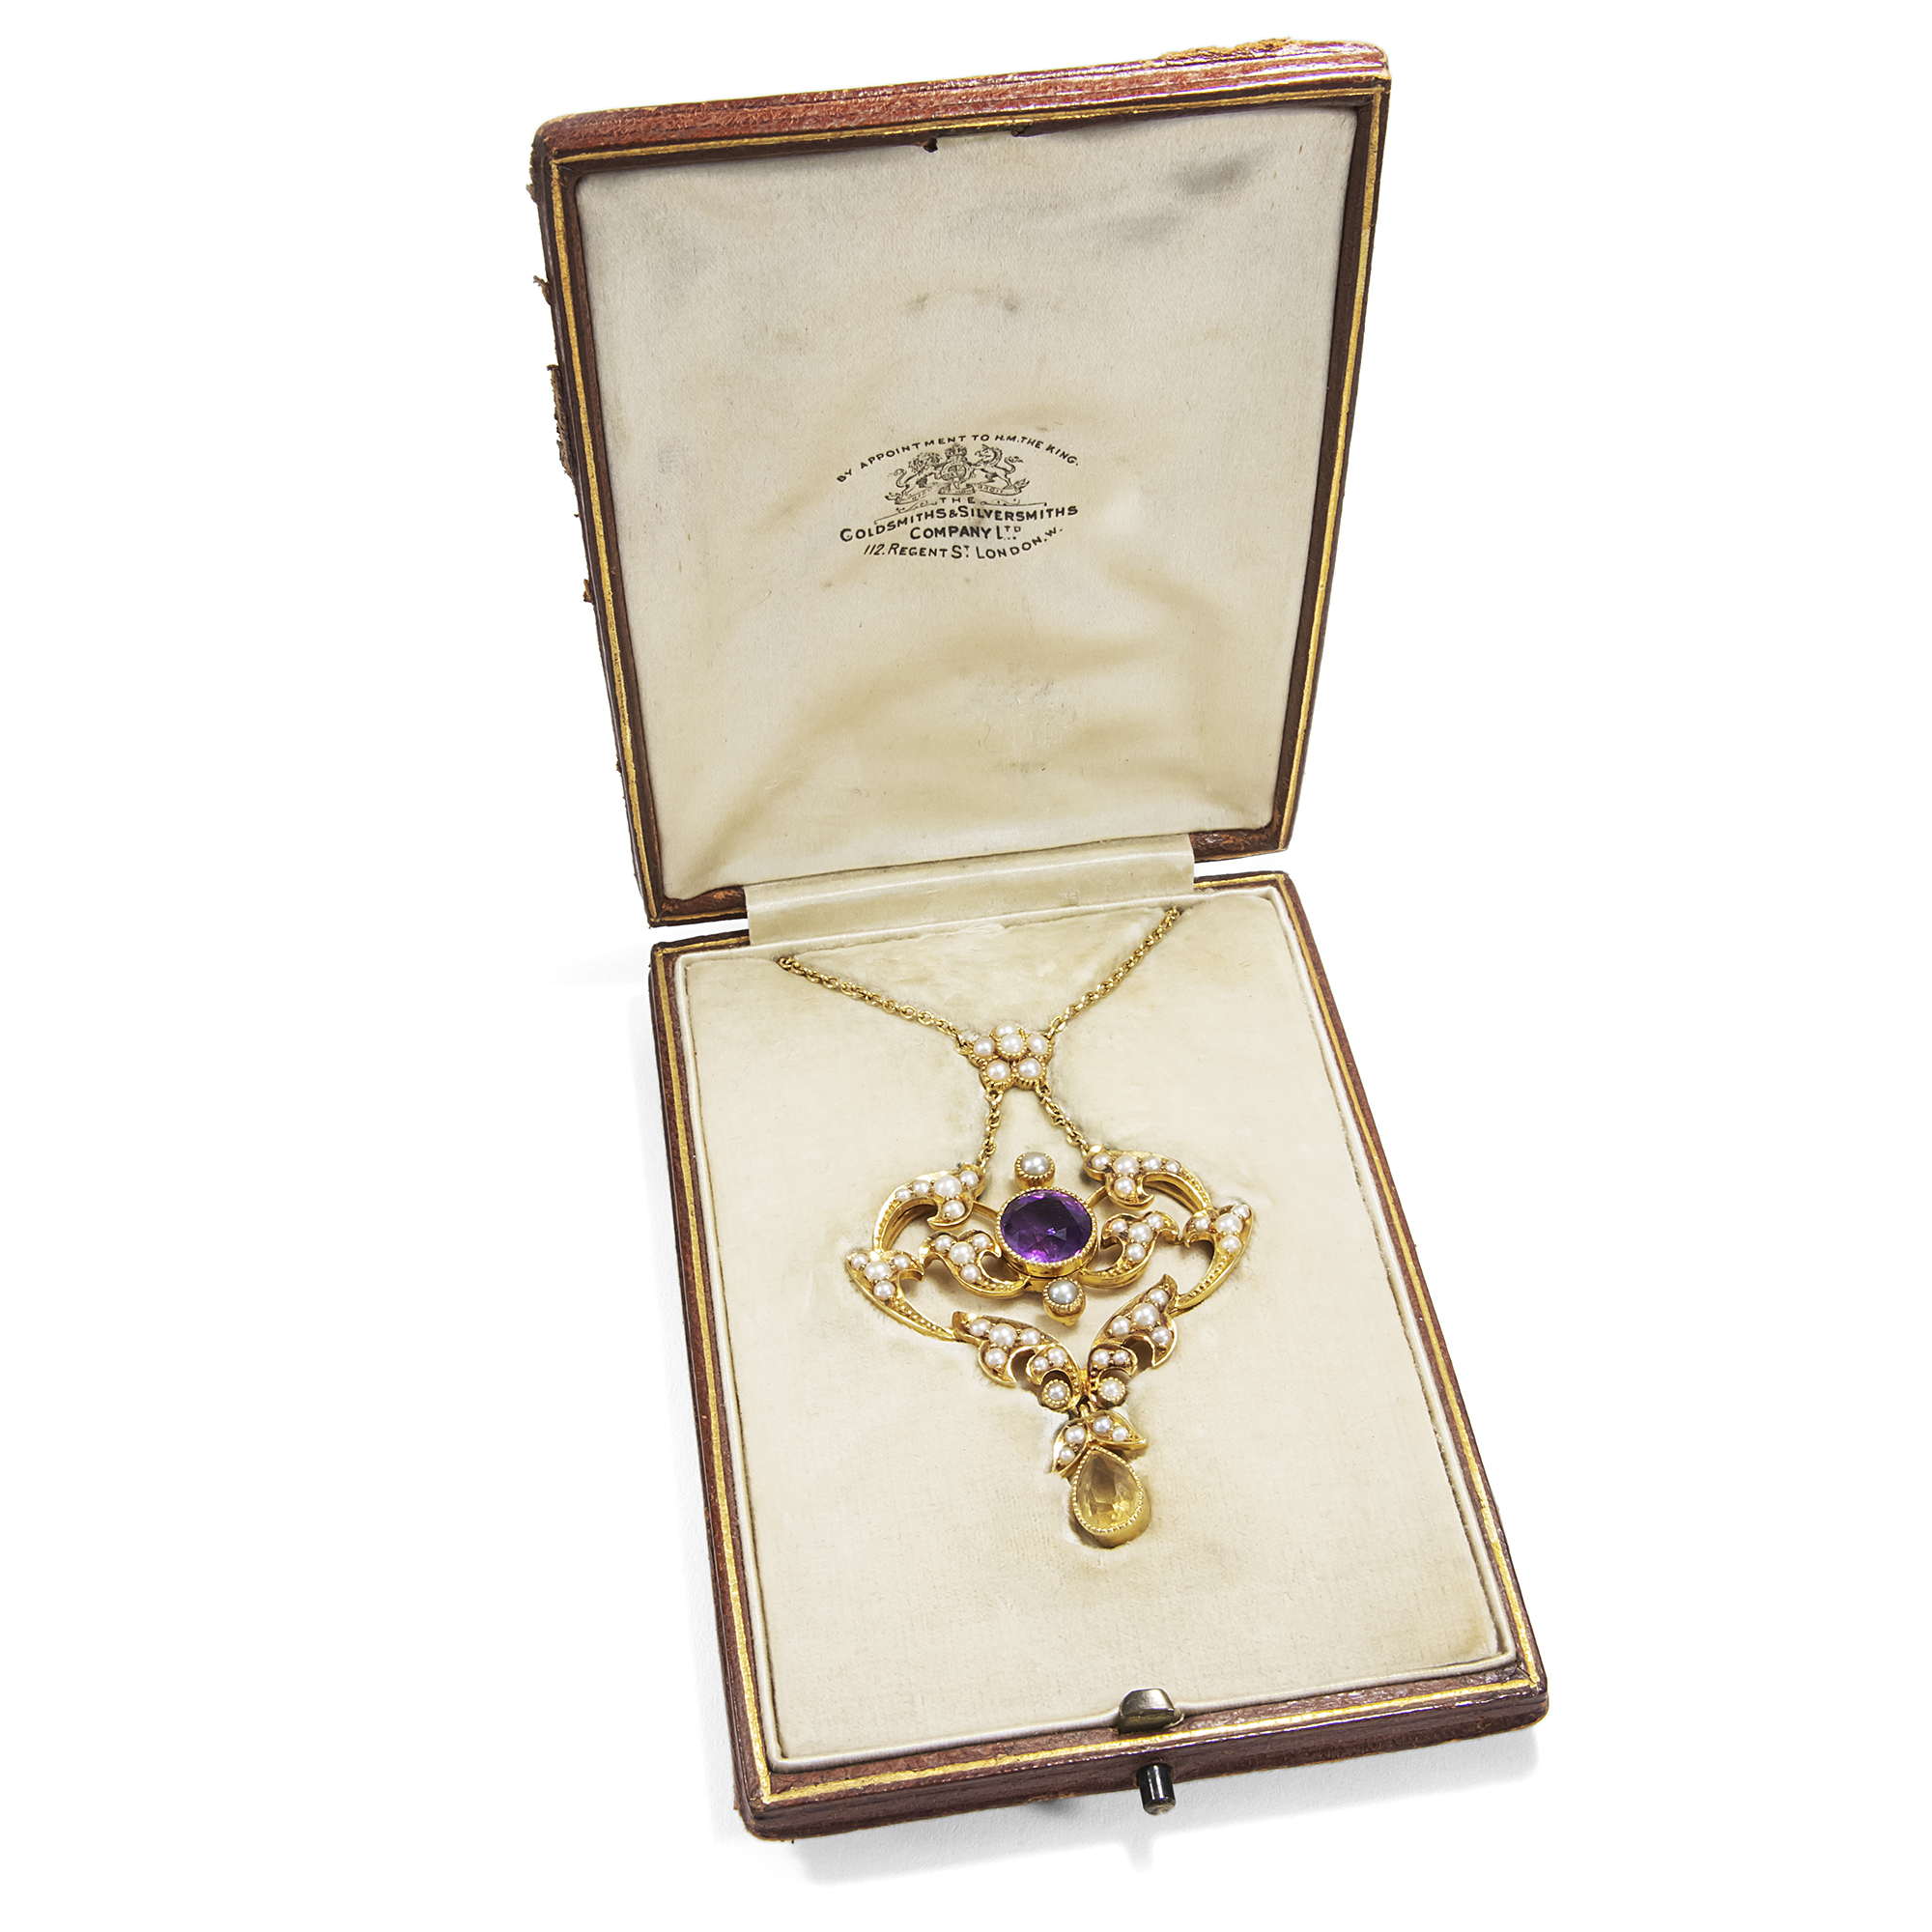 Antique Amethyst, Citrine and Pearl Necklace, British, c. 1905